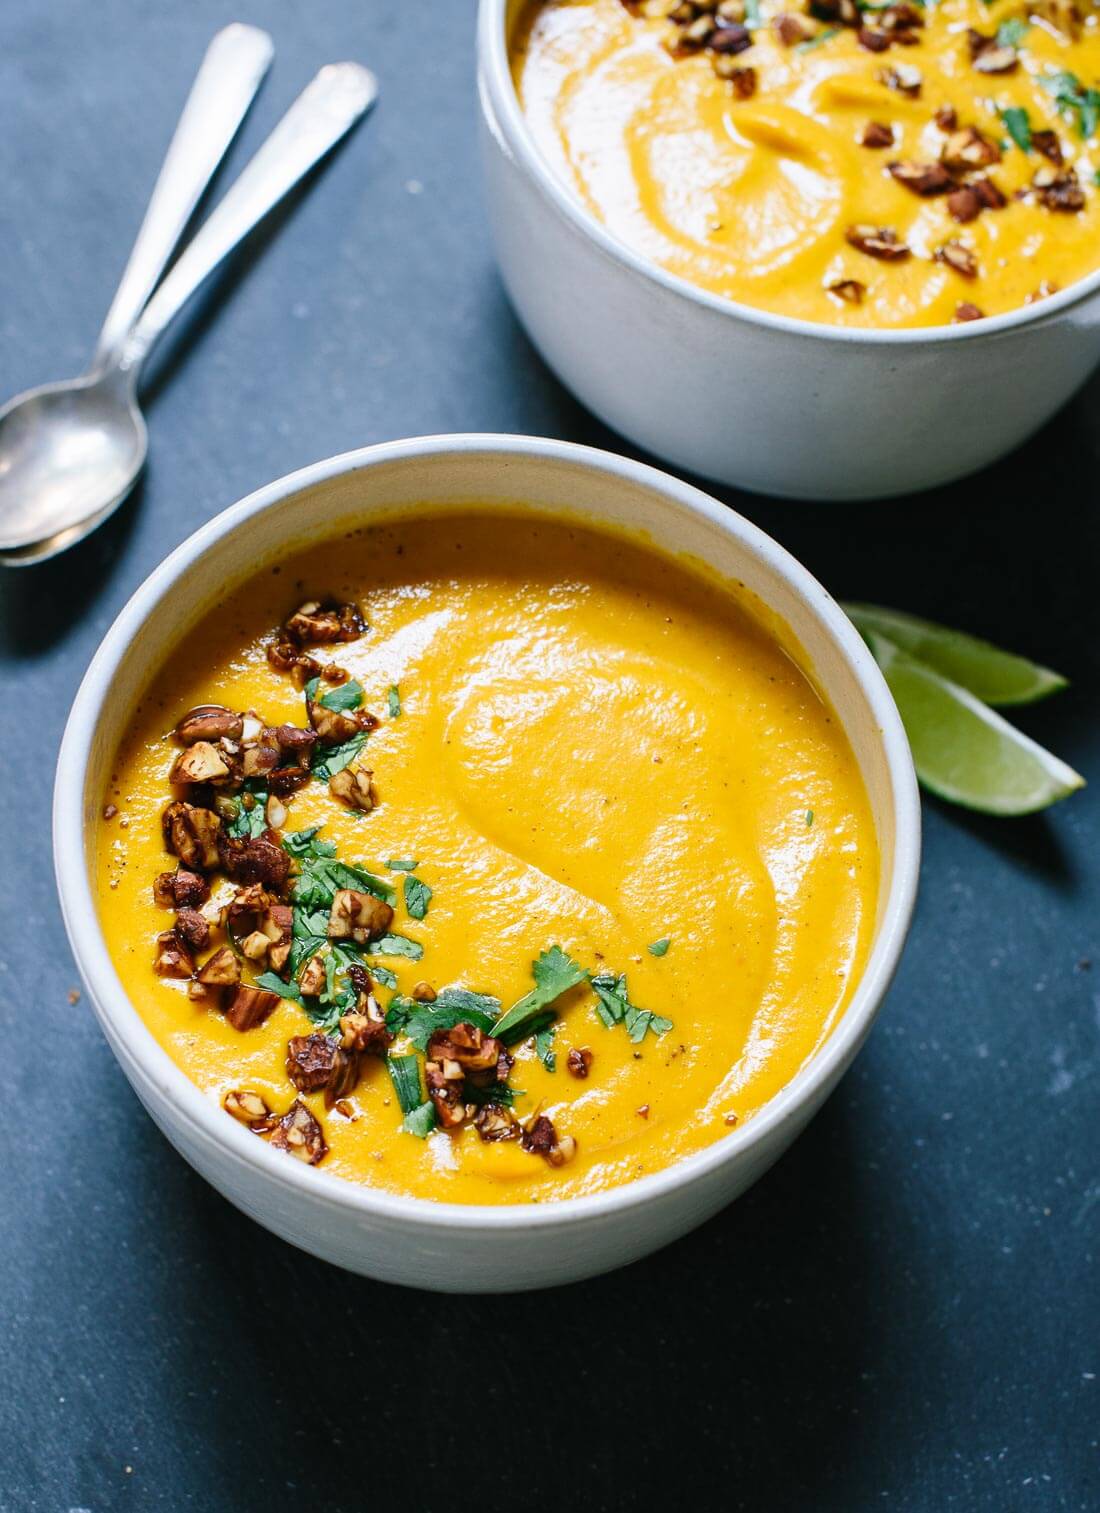 This nutritious, Thai-spiced carrot and sweet potato soup will warm you right up! cookieandkate.com